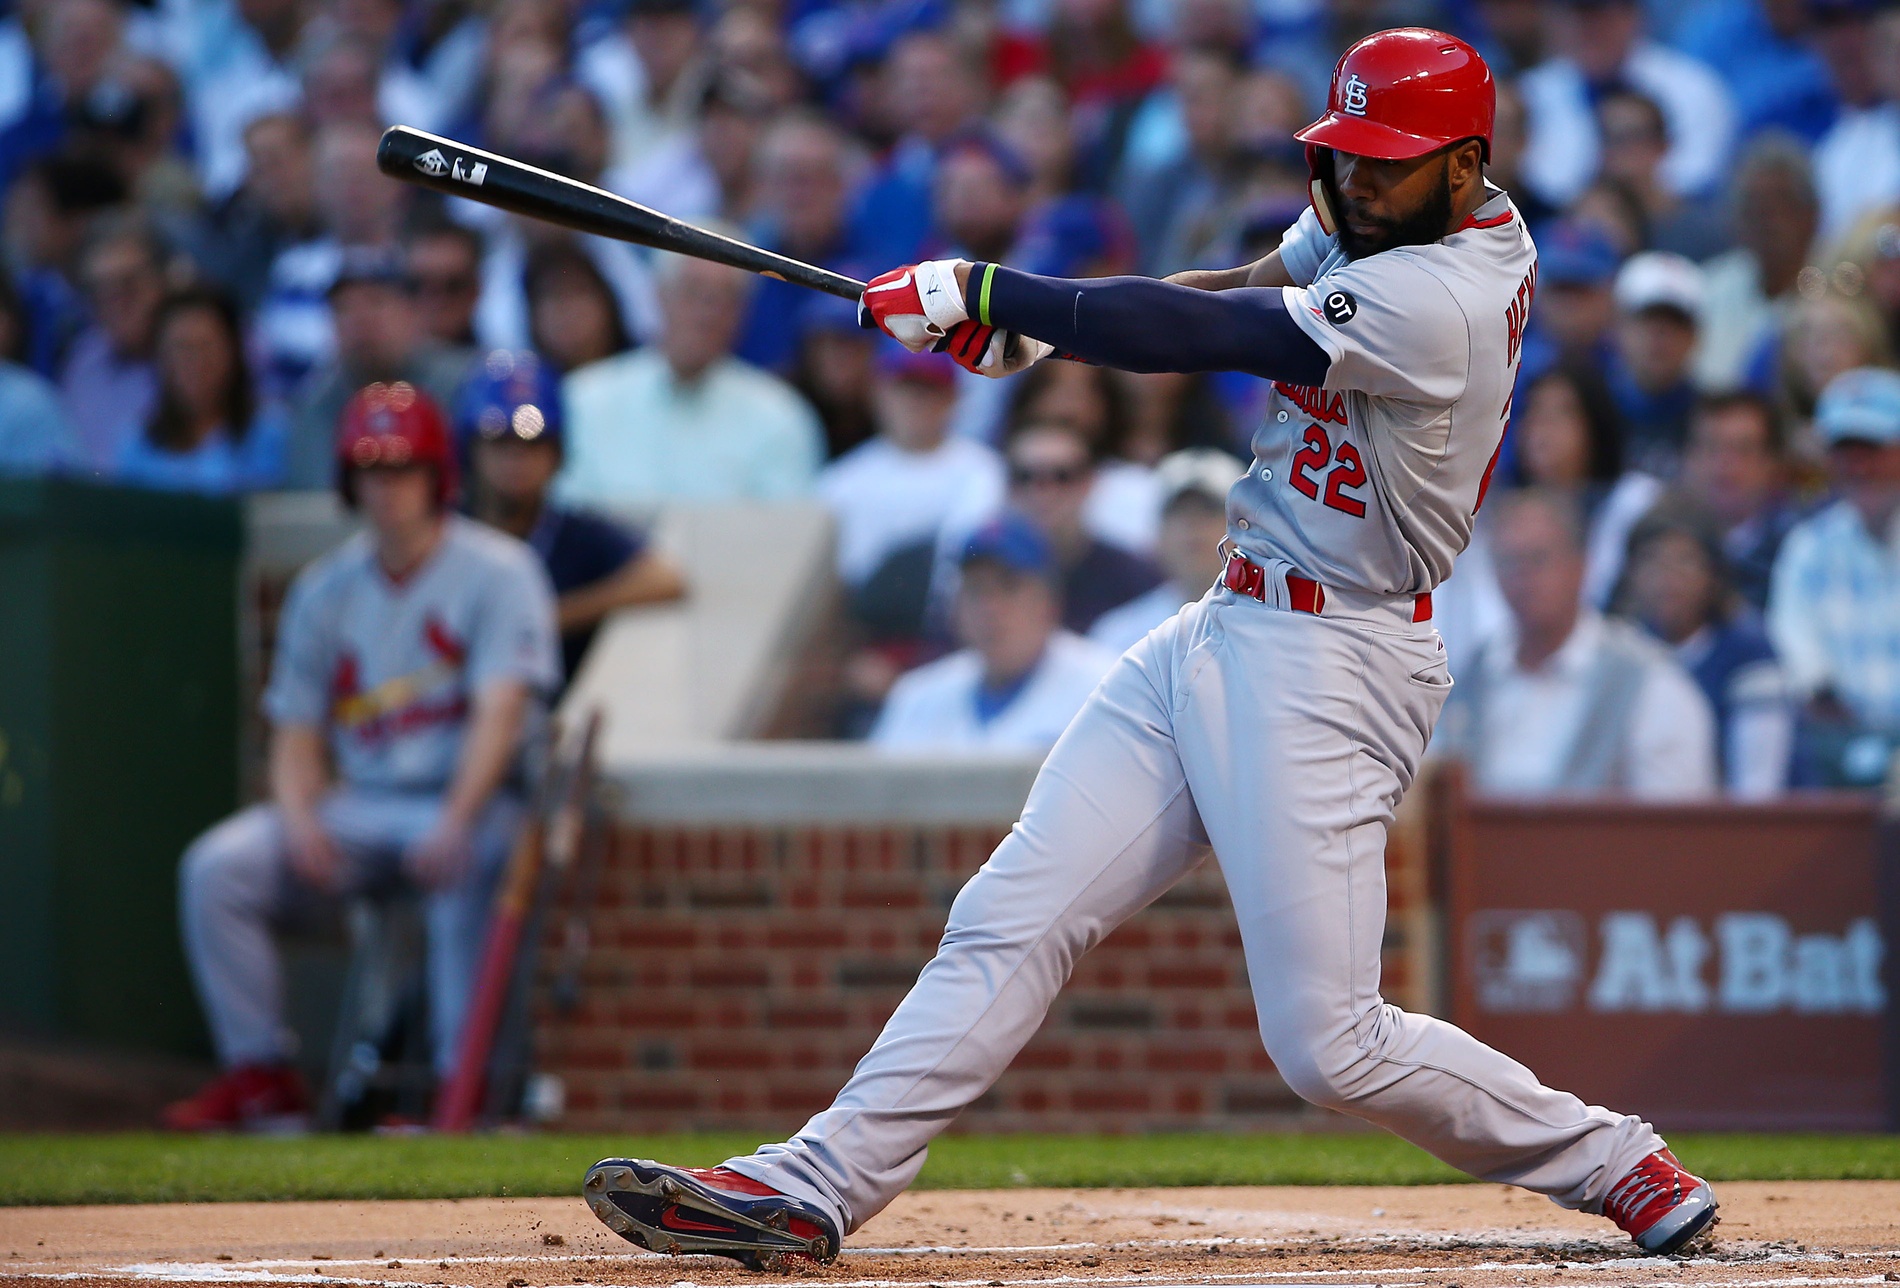 Oct 12, 2015; Chicago, IL, USA; St. Louis Cardinals right fielder Jason Heyward (22) hits a double during the second inning against the Chicago Cubs in game three of the NLDS at Wrigley Field. Mandatory Credit: Jerry Lai-USA TODAY Sports